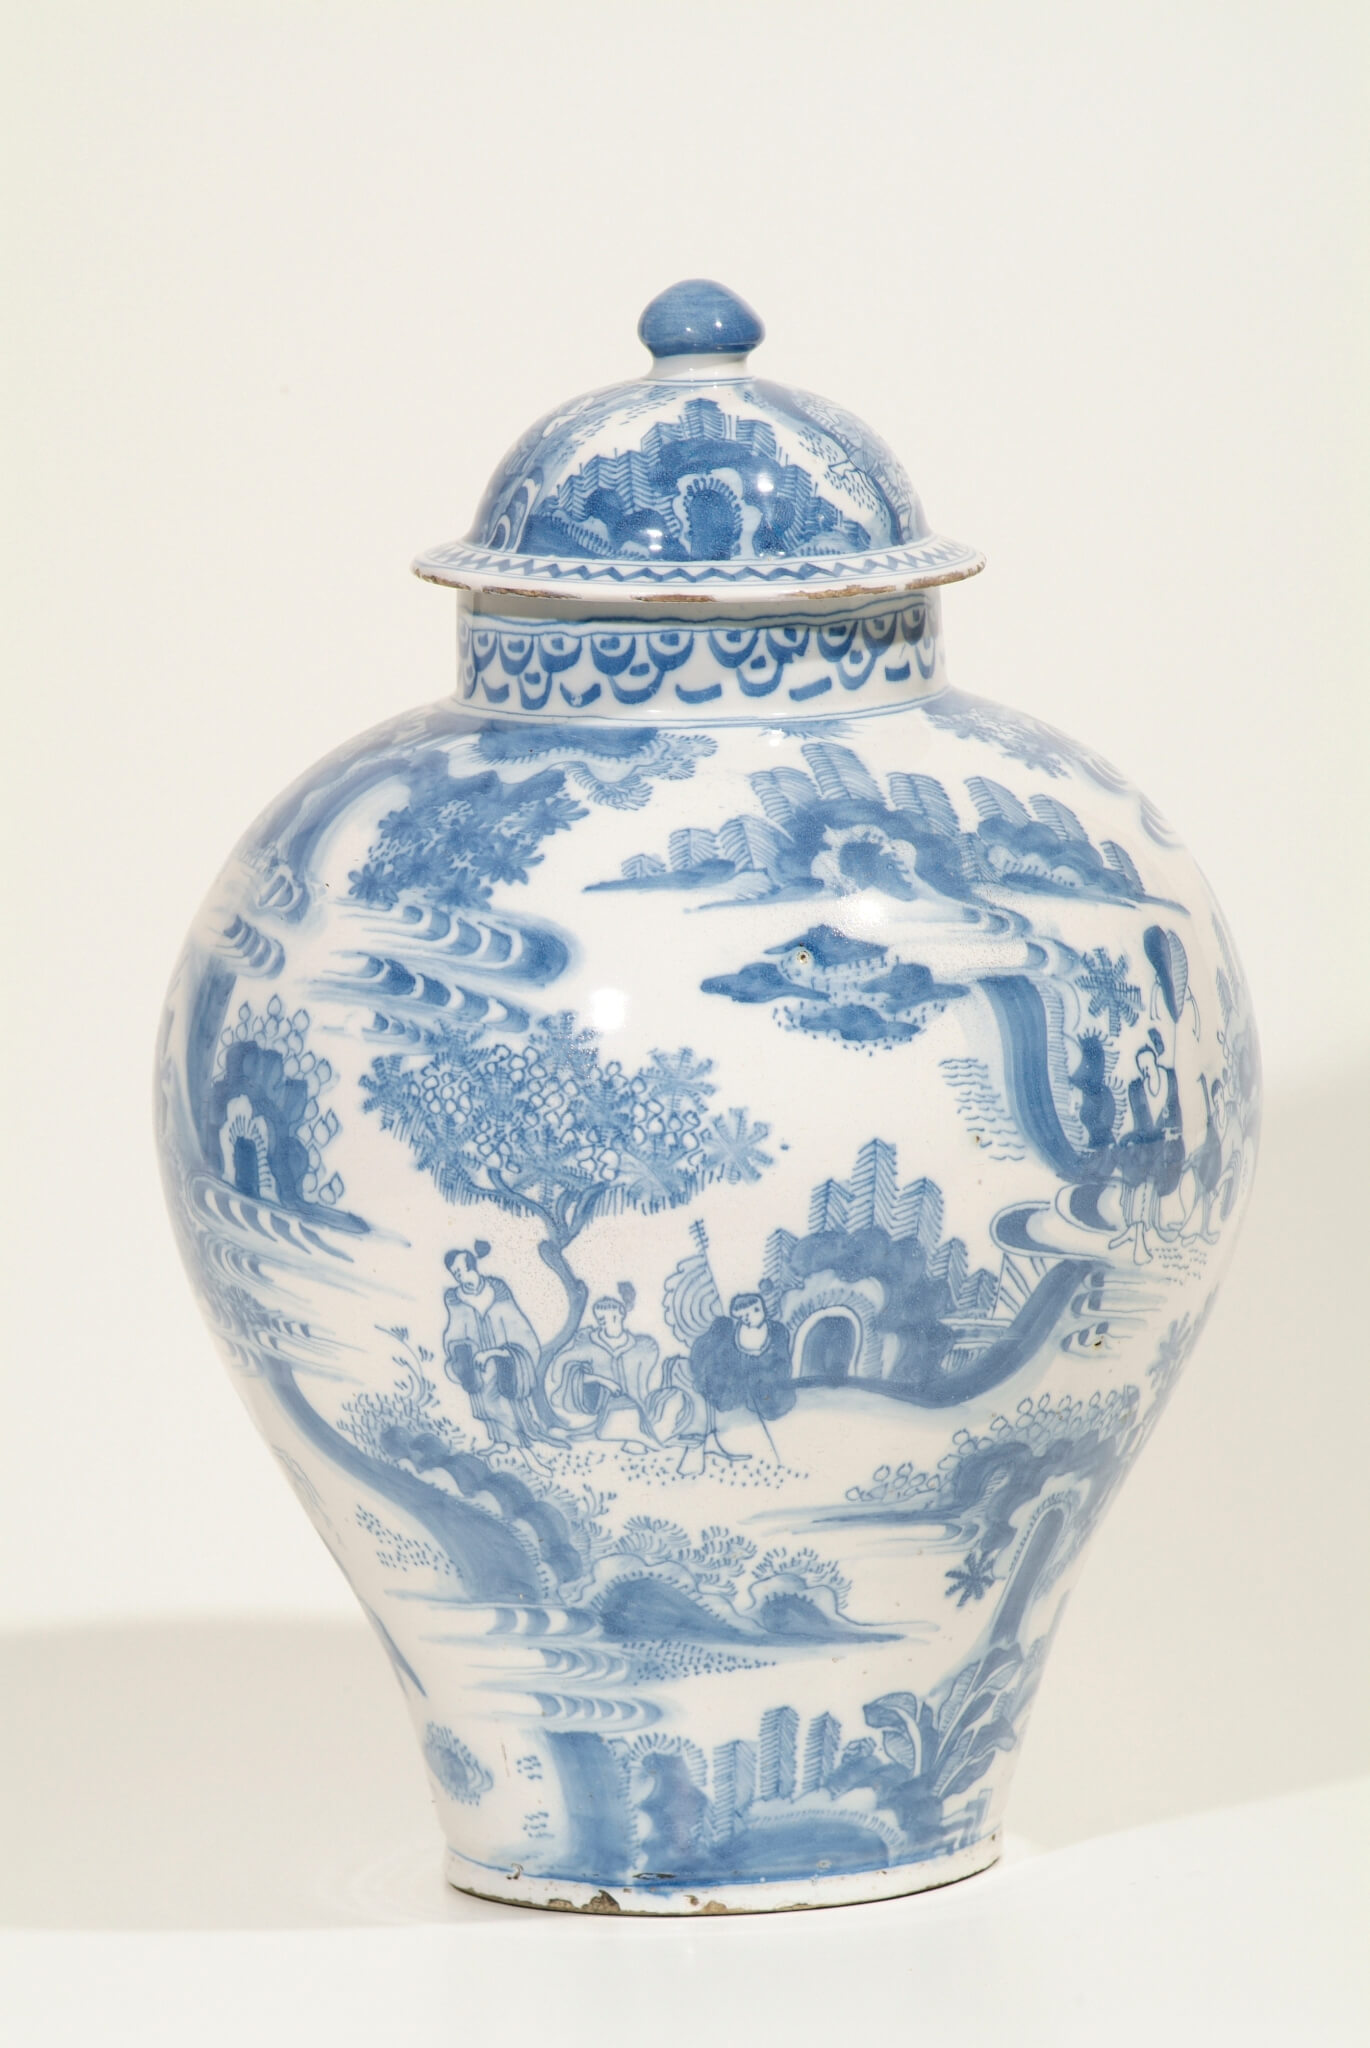 Dutch Delft Pottery blue and white bluster form jar